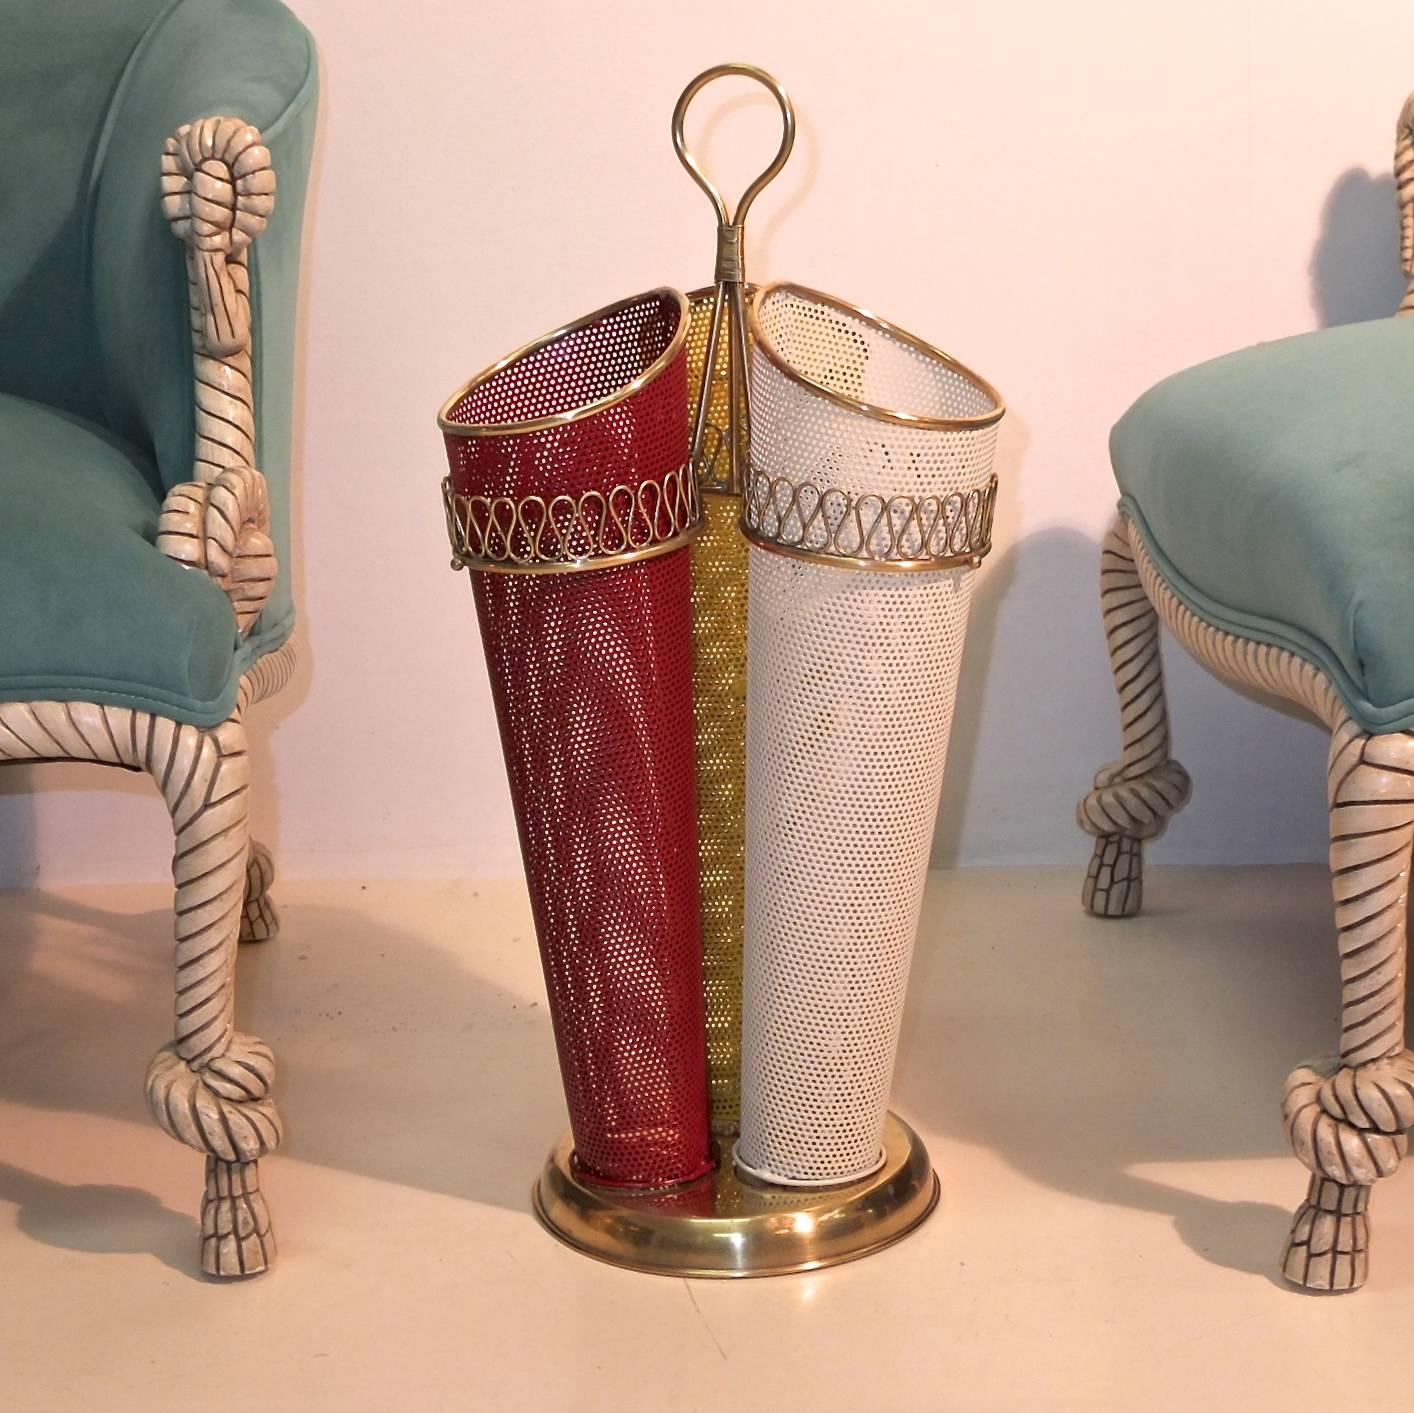 Italian 1950s umbrella holder with brass serpentine embellishments as seen on the mirrors of Gio Ponti. Three perforated metal cones trimmed in brass, lacquered ivory, yellow and red on a round brass base with a brass looped ring finial. 

A